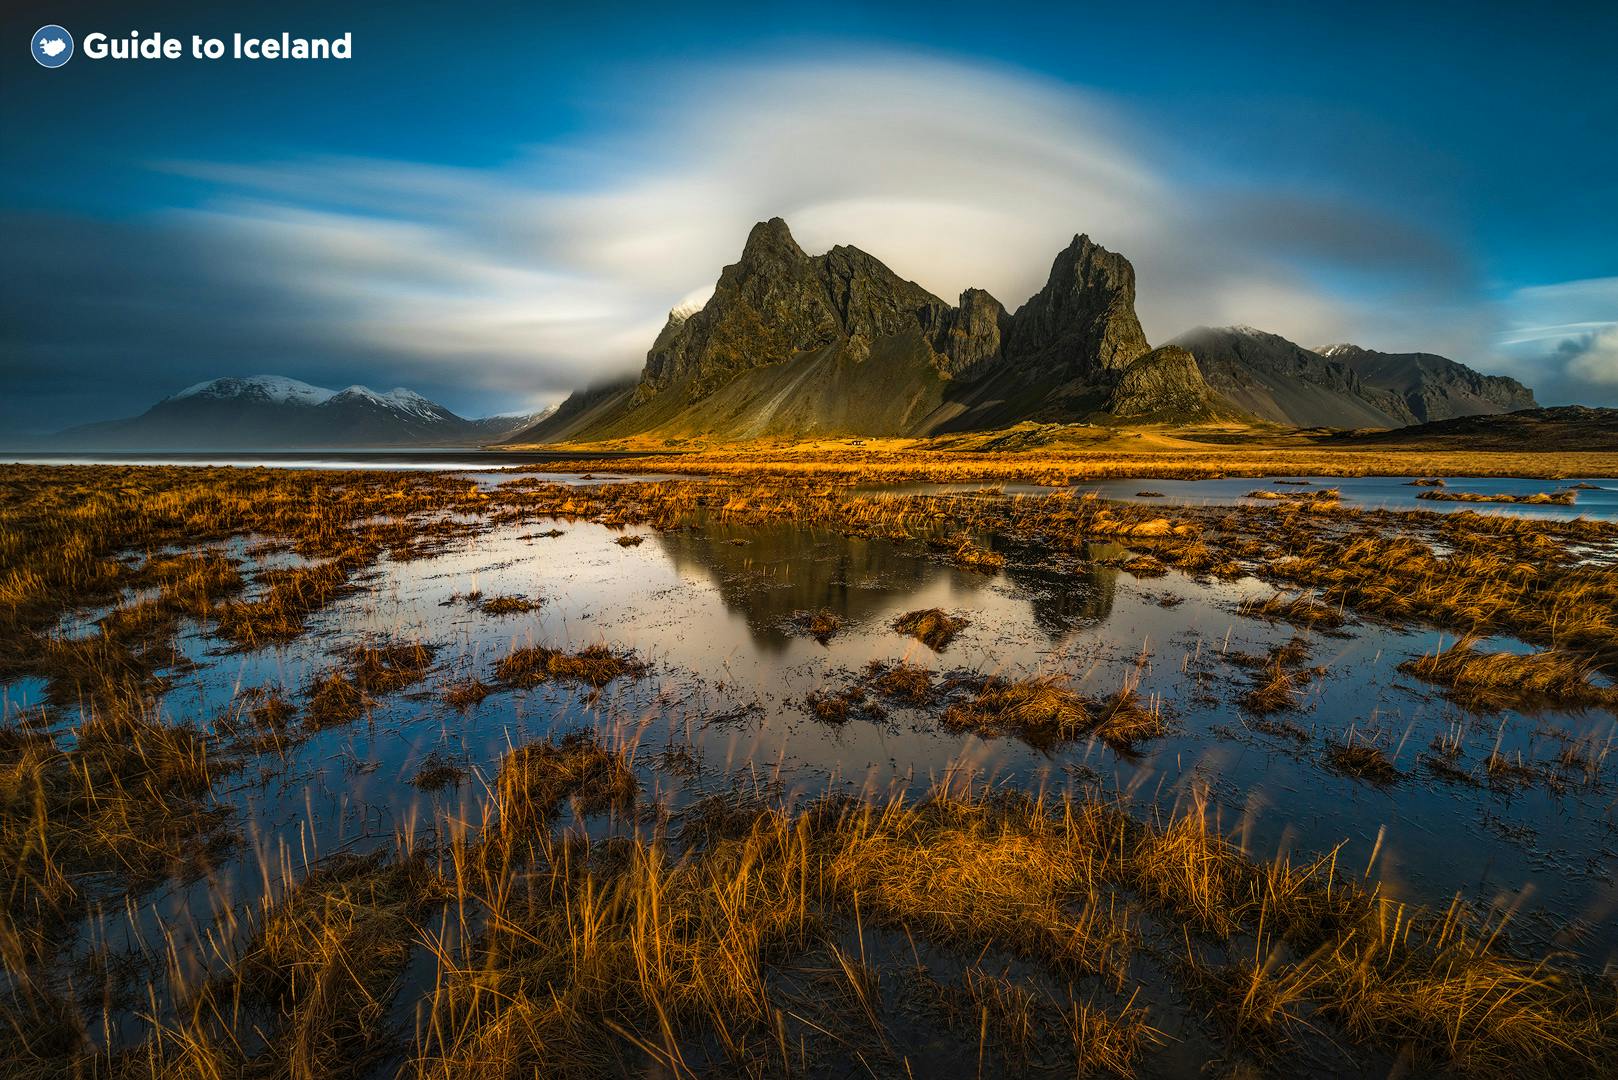 Eystrahorn Mountain in the remote Eastfjords of Iceland.